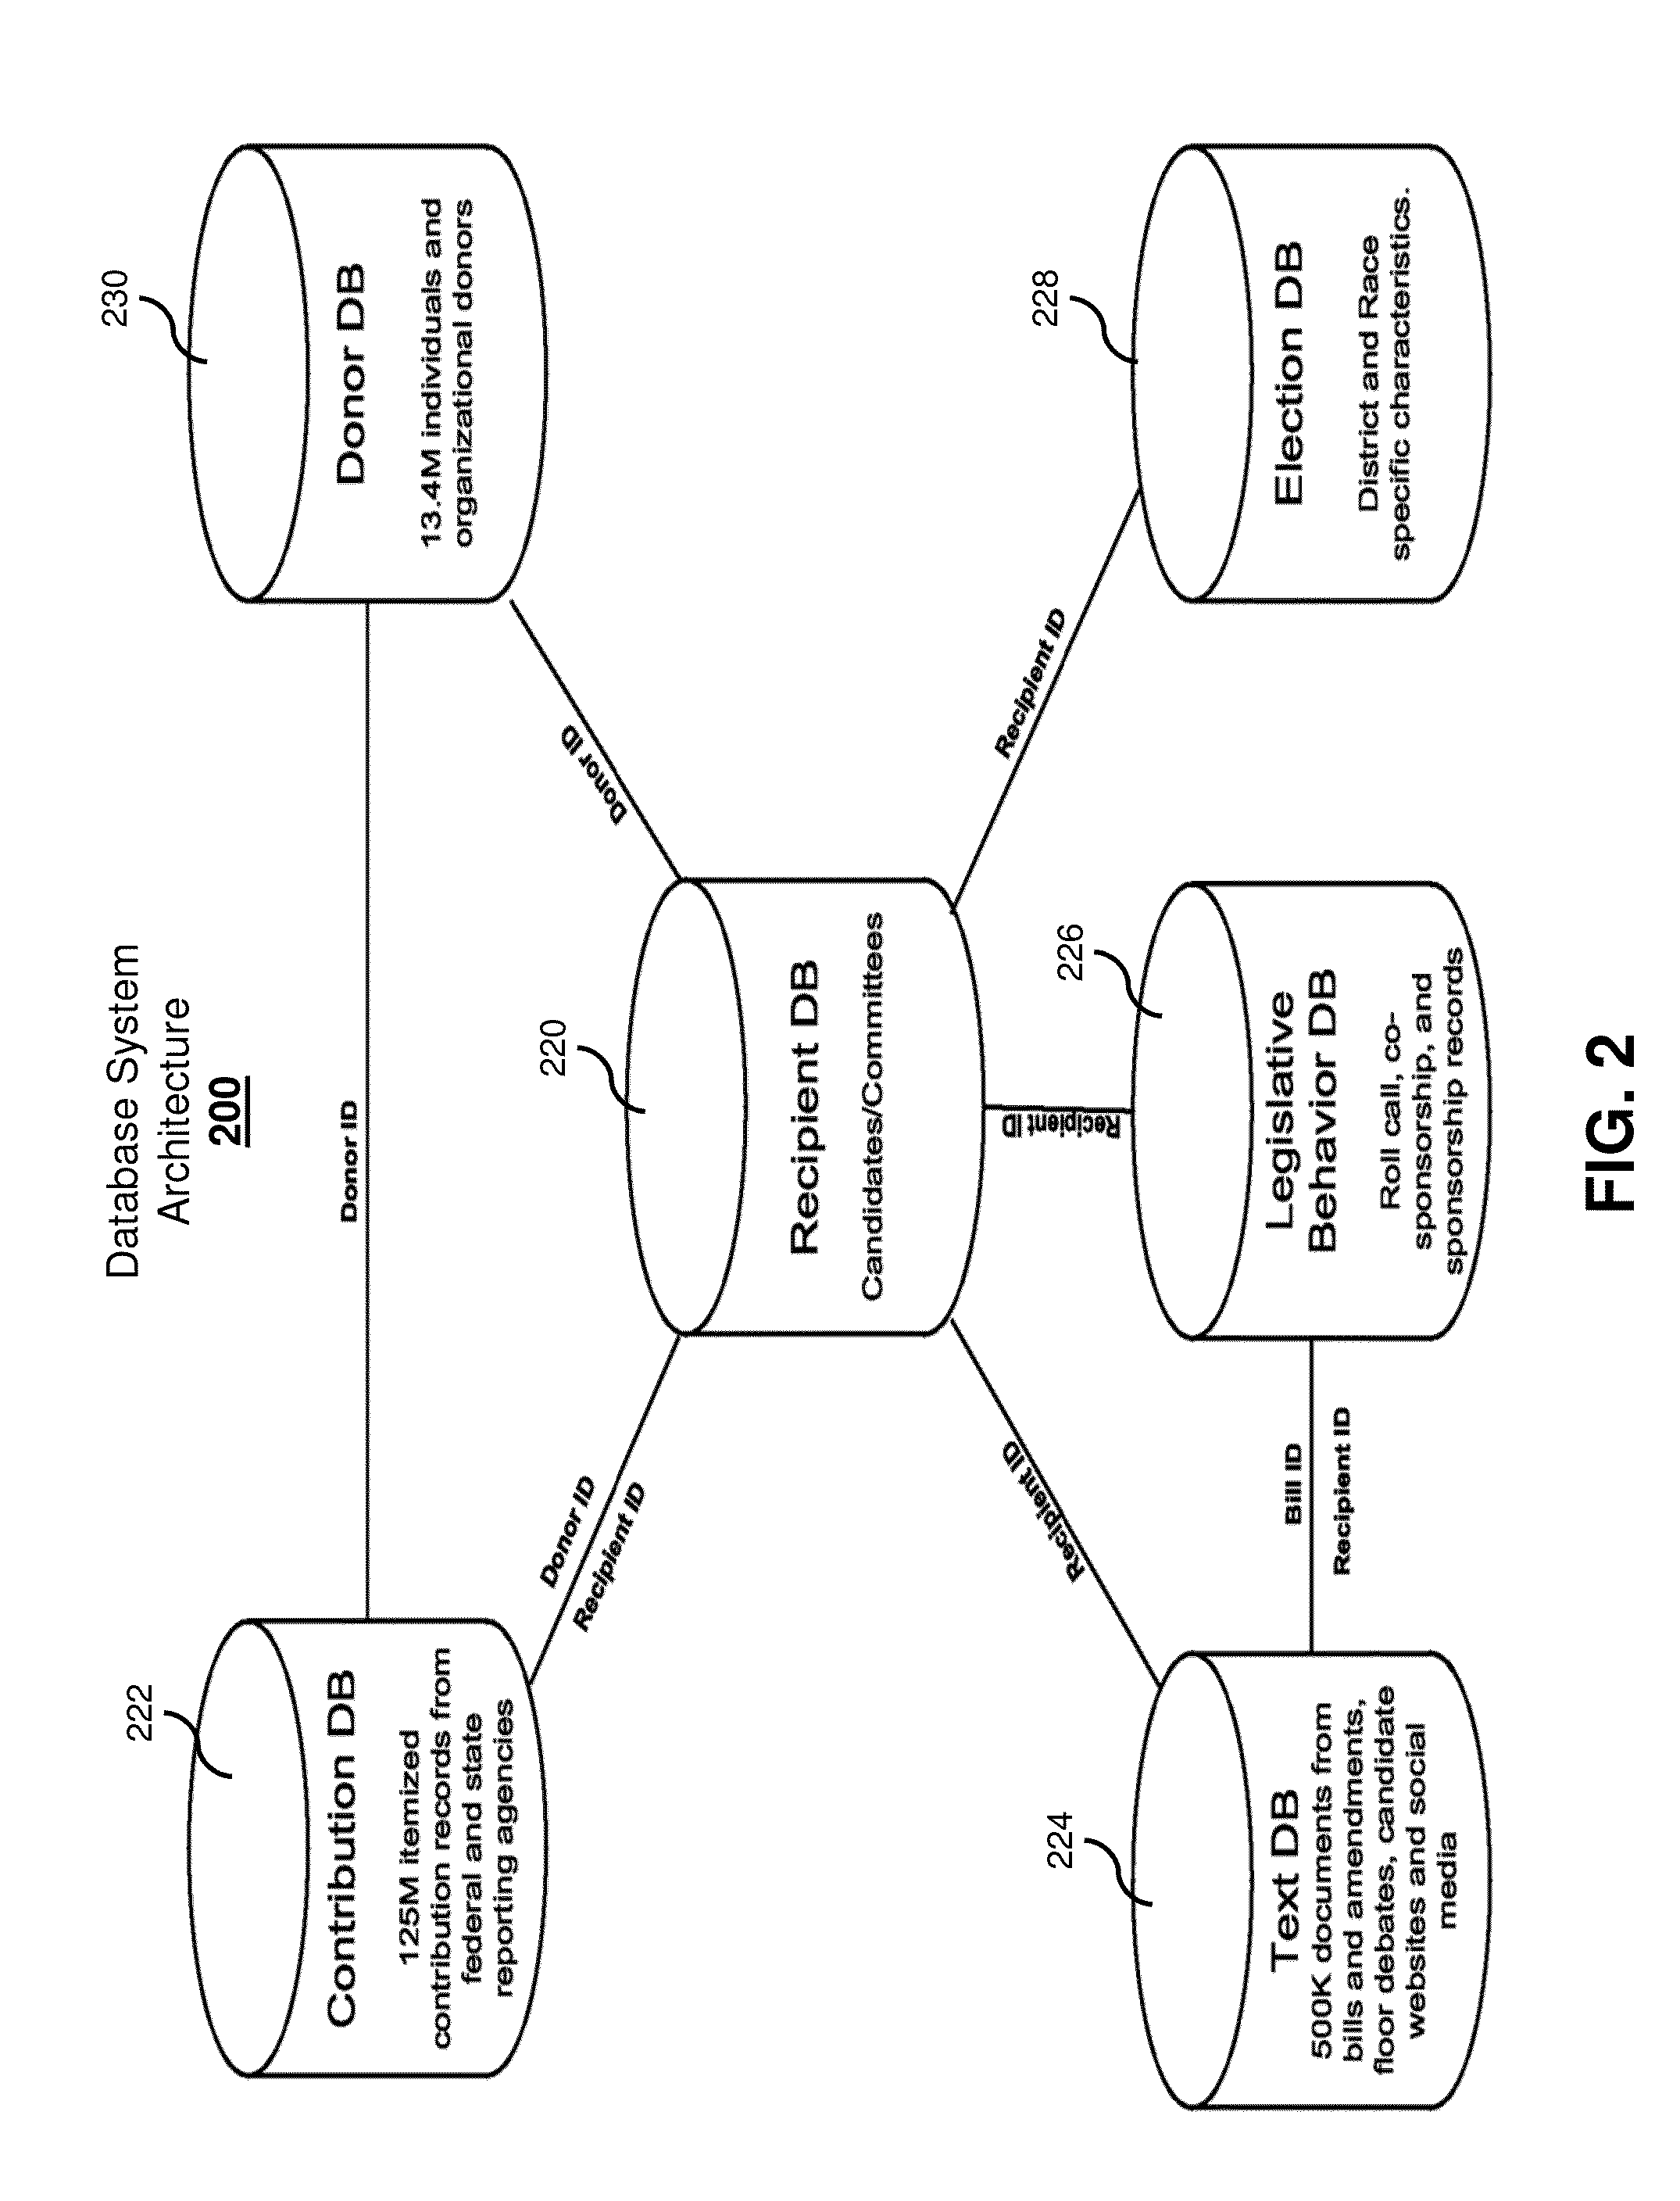 Interface and methods for tracking and analyzing political ideology and interests